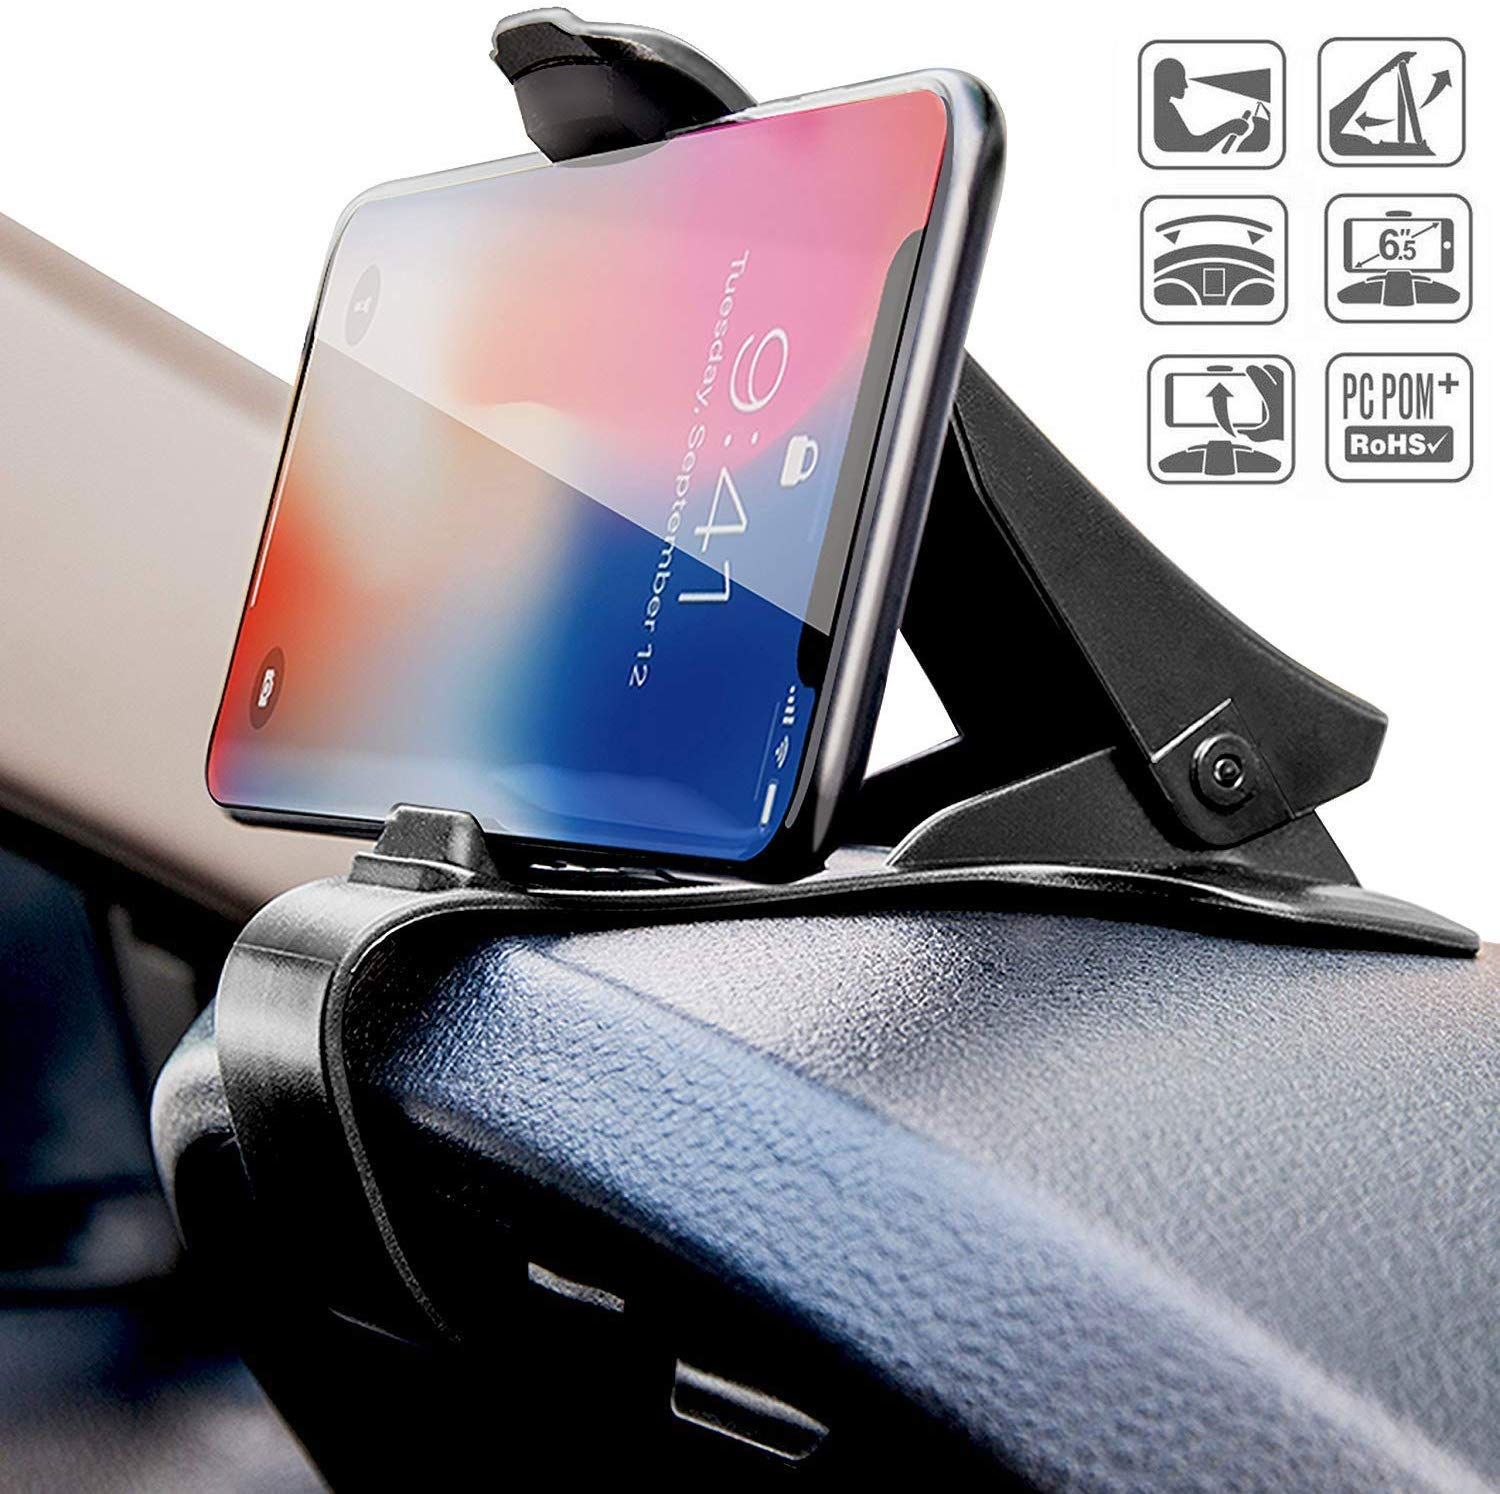 Chimti Car Mobile Holder for Dashboard Anti-Slip Vehicle GPS Cellphone Mount Mobile Clip Stand for Galaxy S8/S7/S6/S5 and Other Smartphones Size Upto 6.5